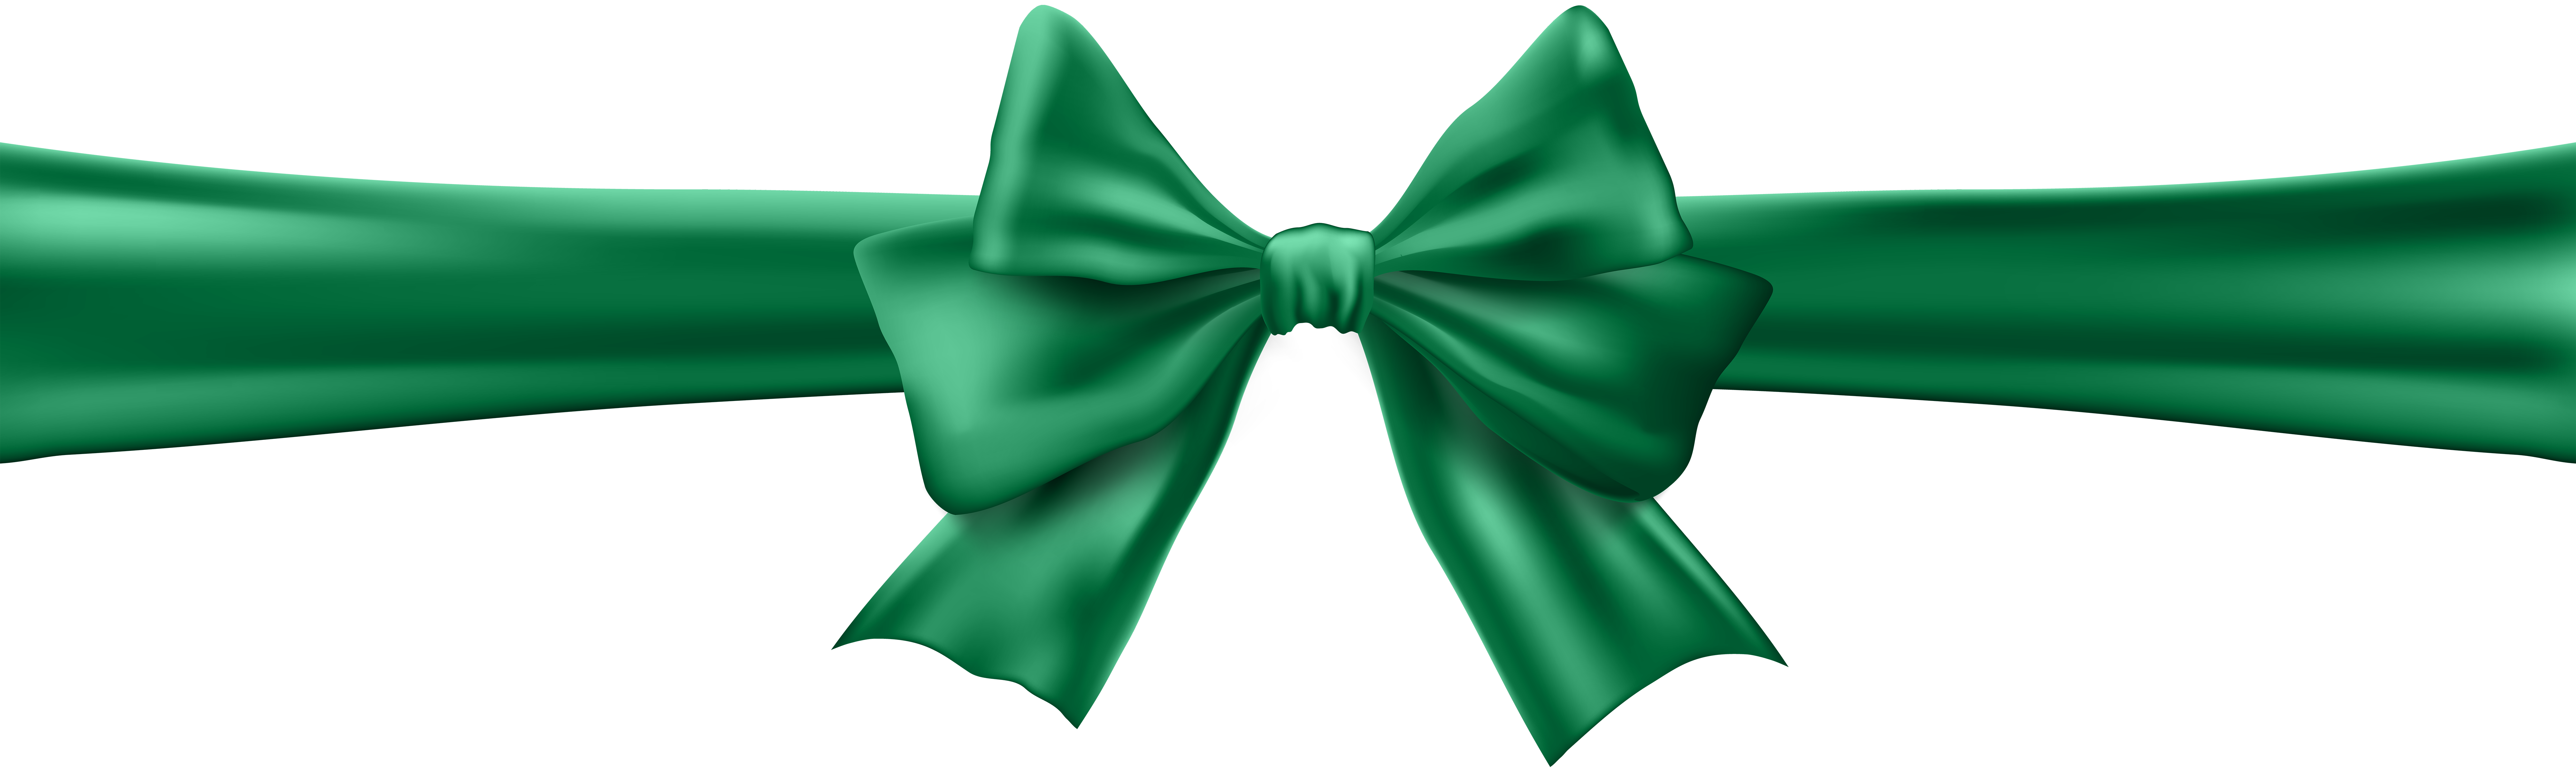 Green Bow With Ribbon Clip Art Image Gallery Yopriceville High